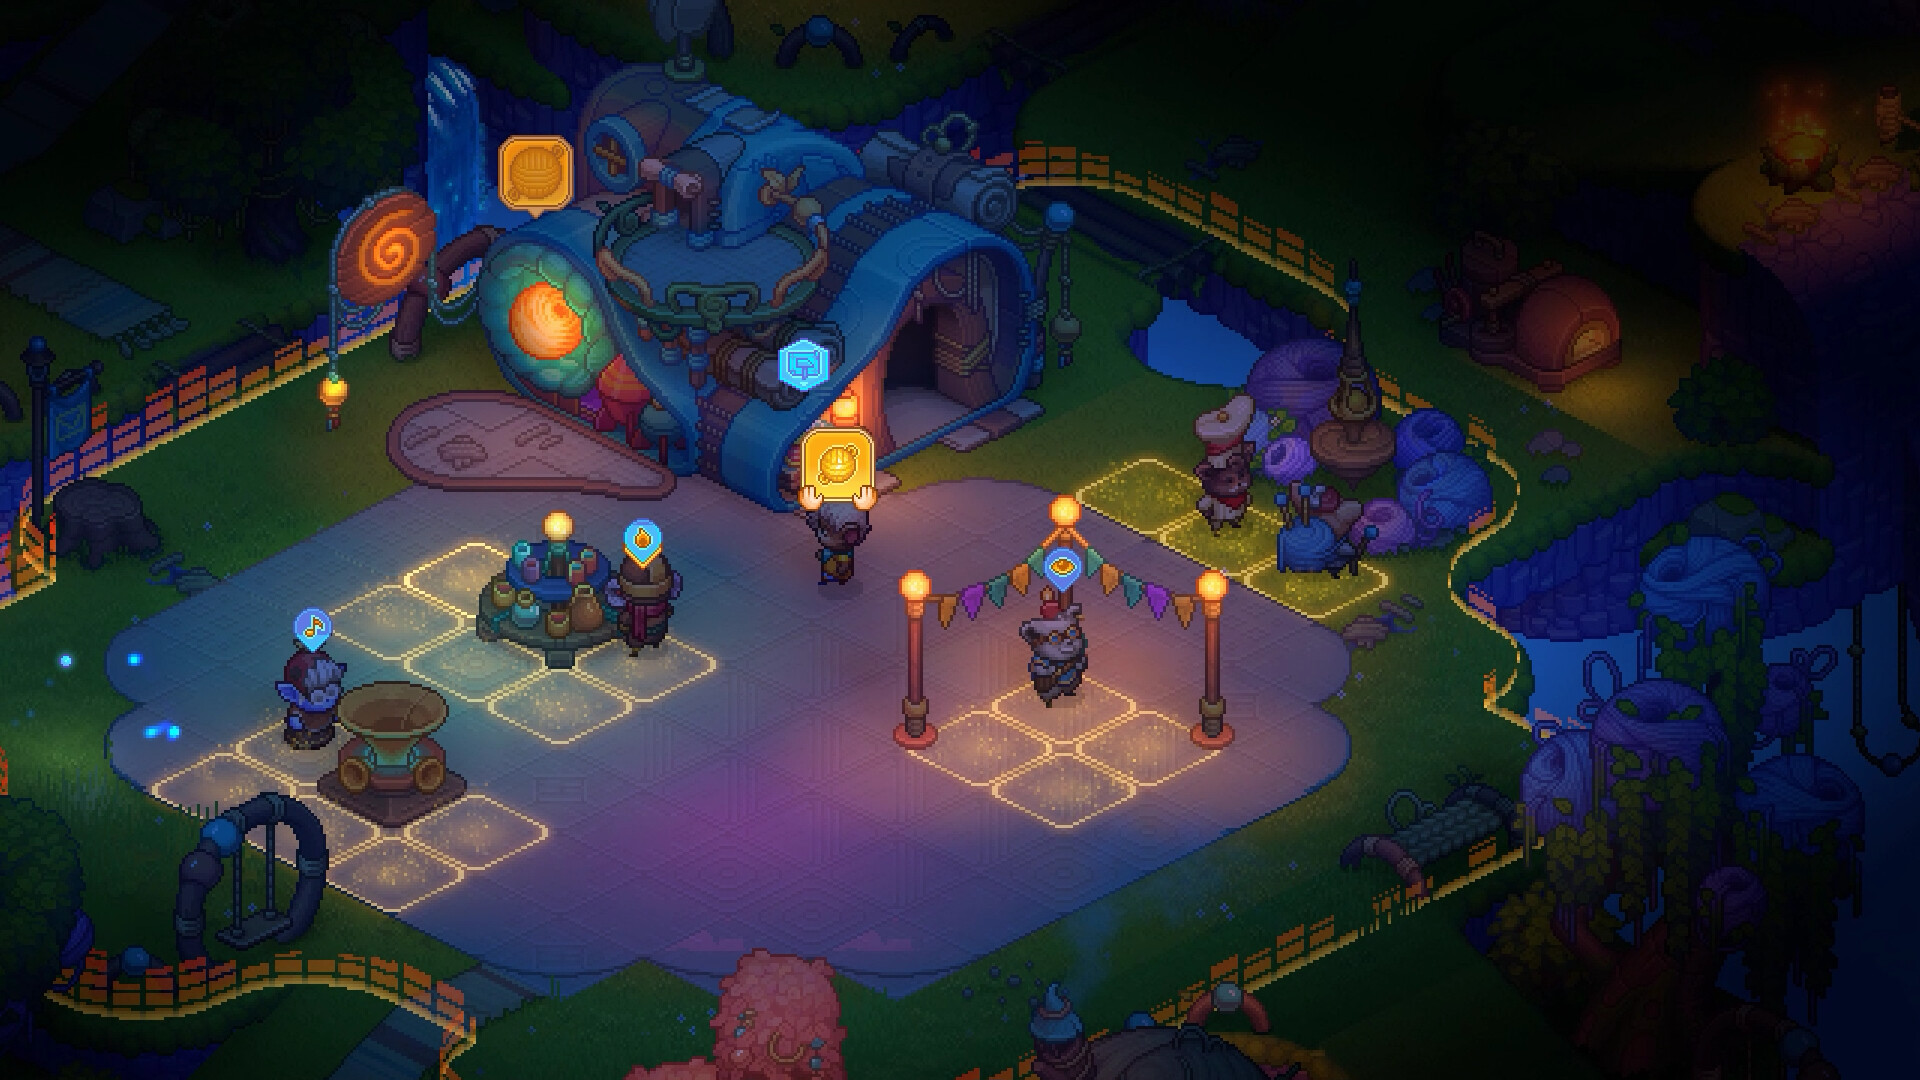 A Yordle throws a party in Bandle Tale: A League of Legends Story.